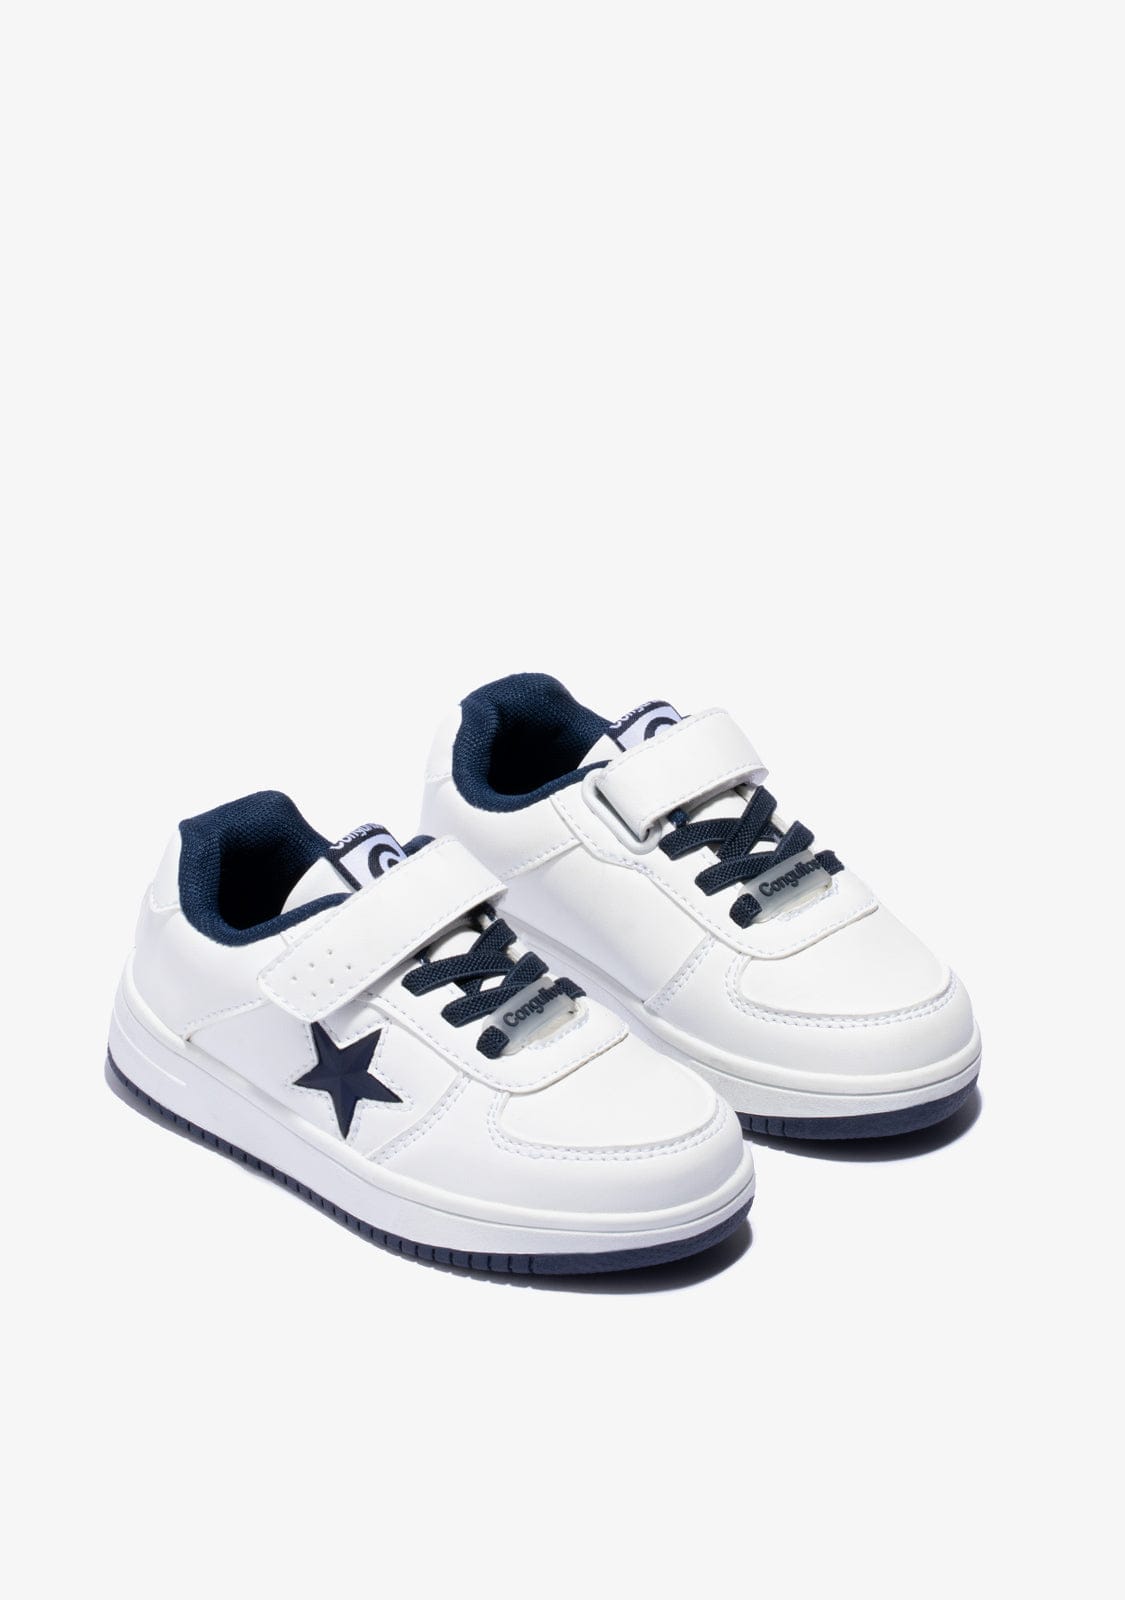 CONGUITOS Shoes Unisex White Navy With Lights Star Sneakers